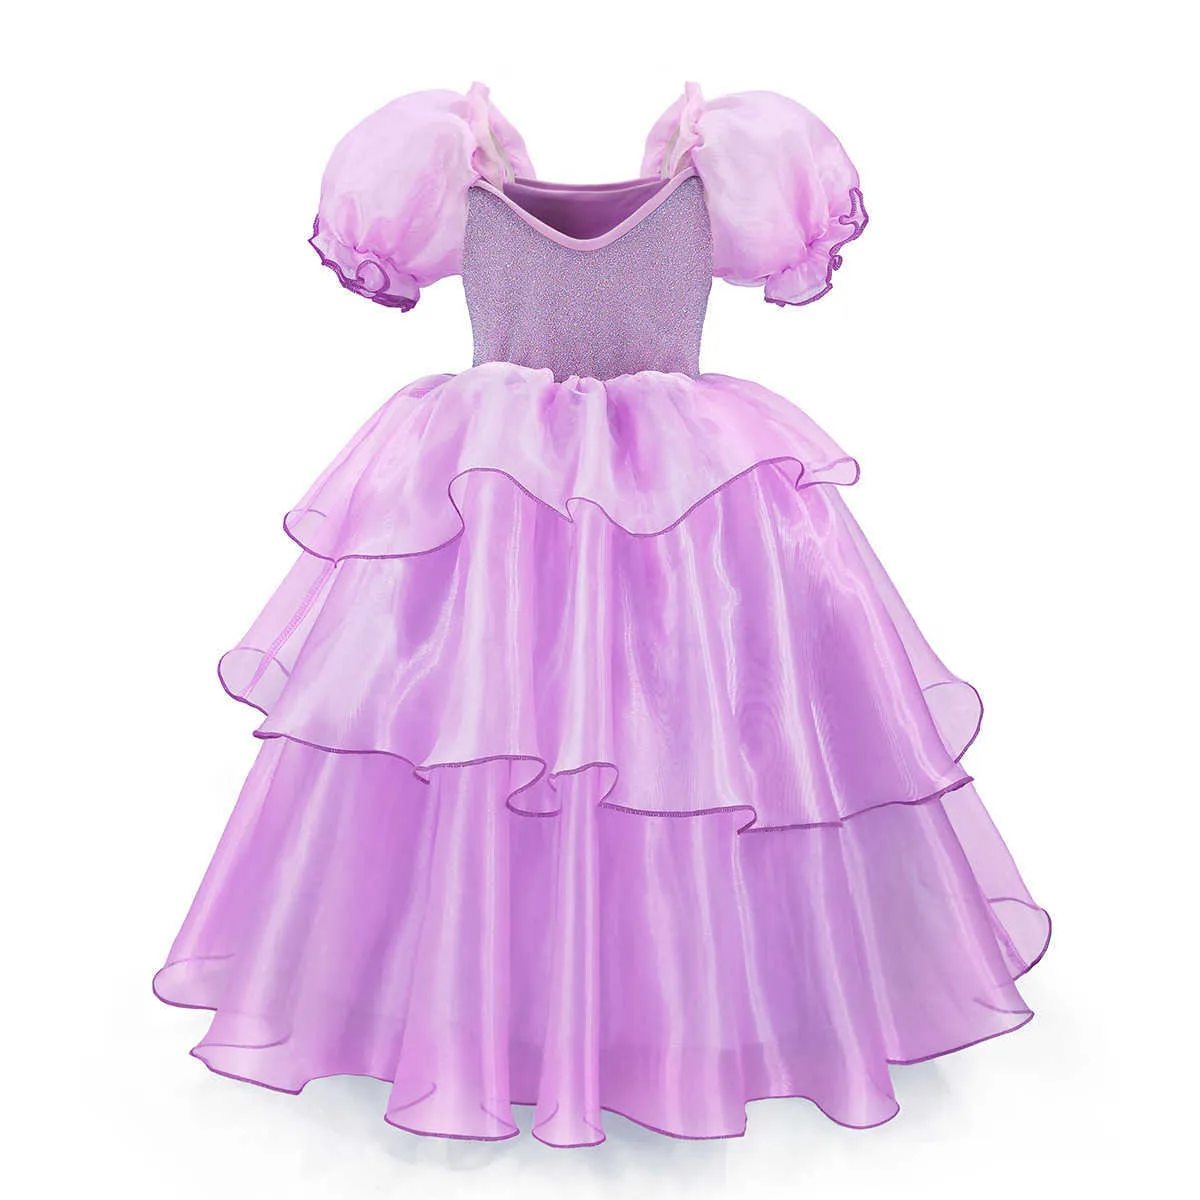 Girl's Dresses Mirabel Madrigal Come Charm Girl Princess Dress Fancy Kid Encanto Carnival Halloween Party Clothes Child Prom Vestidos